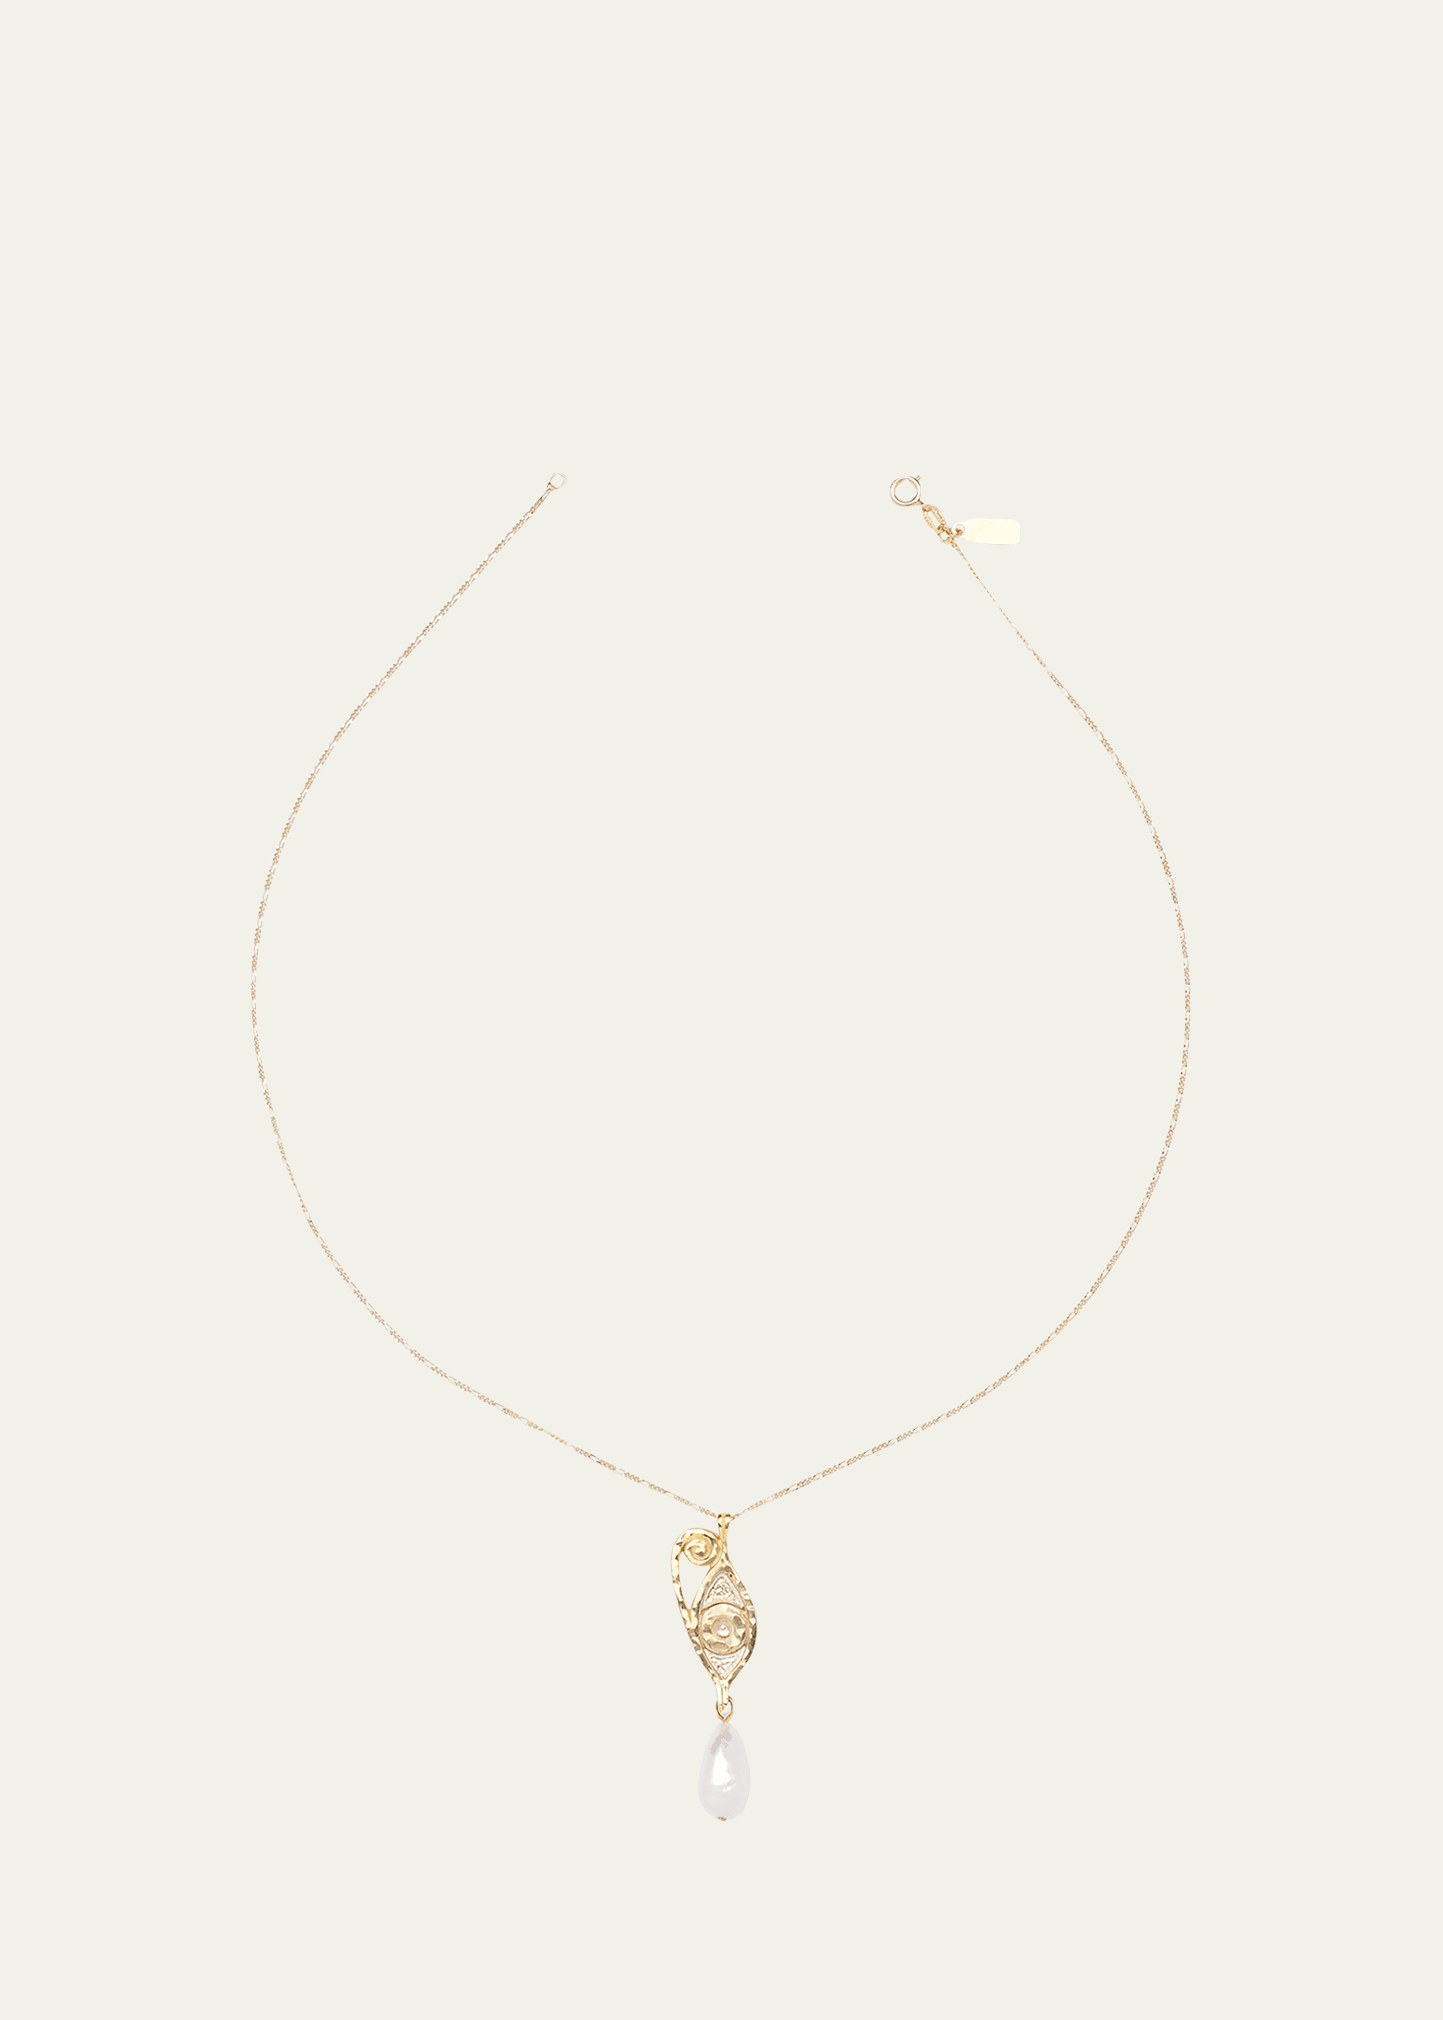 14K Yellow Gold Ayla Pearl Necklace